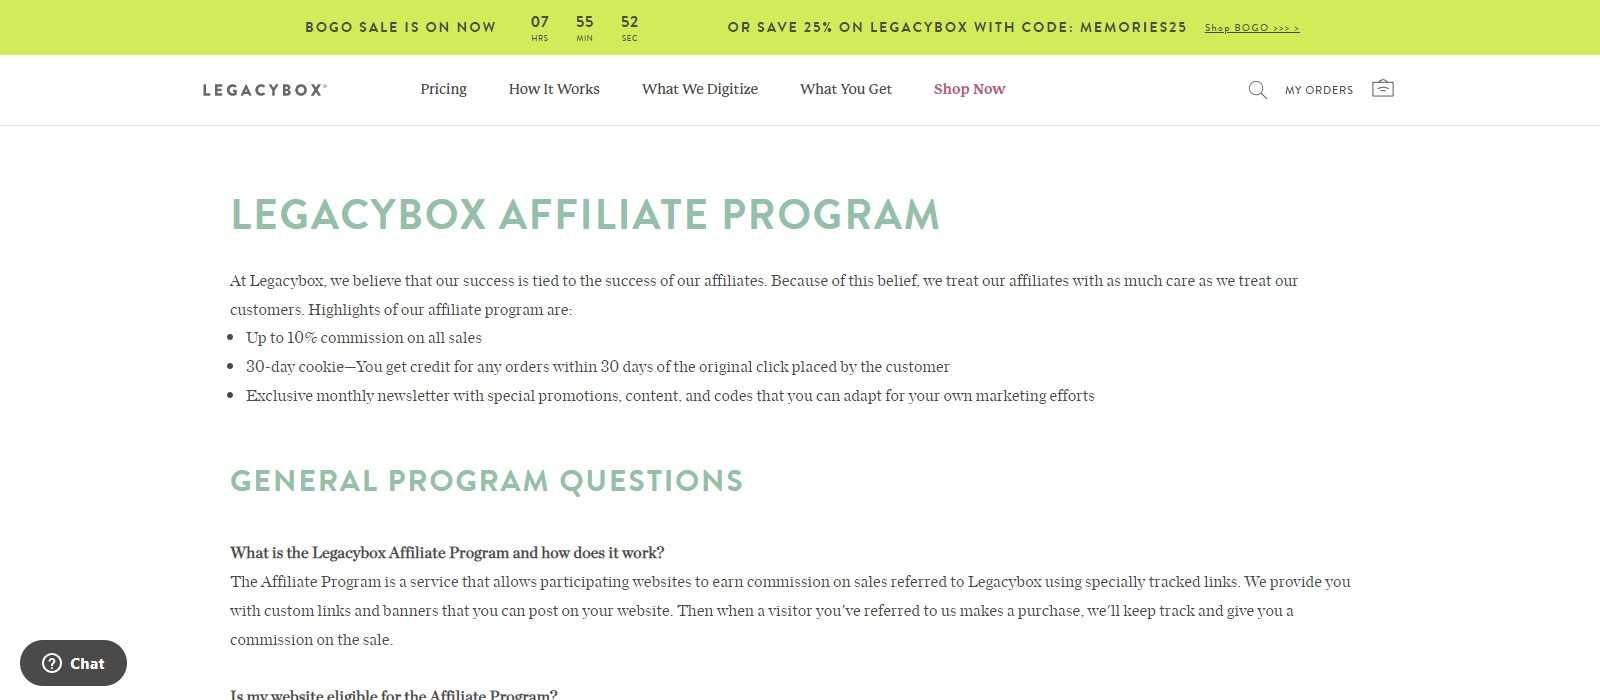 Legacybox Affiliate Program Review: Earn Up to 10% Commission On Each Sale